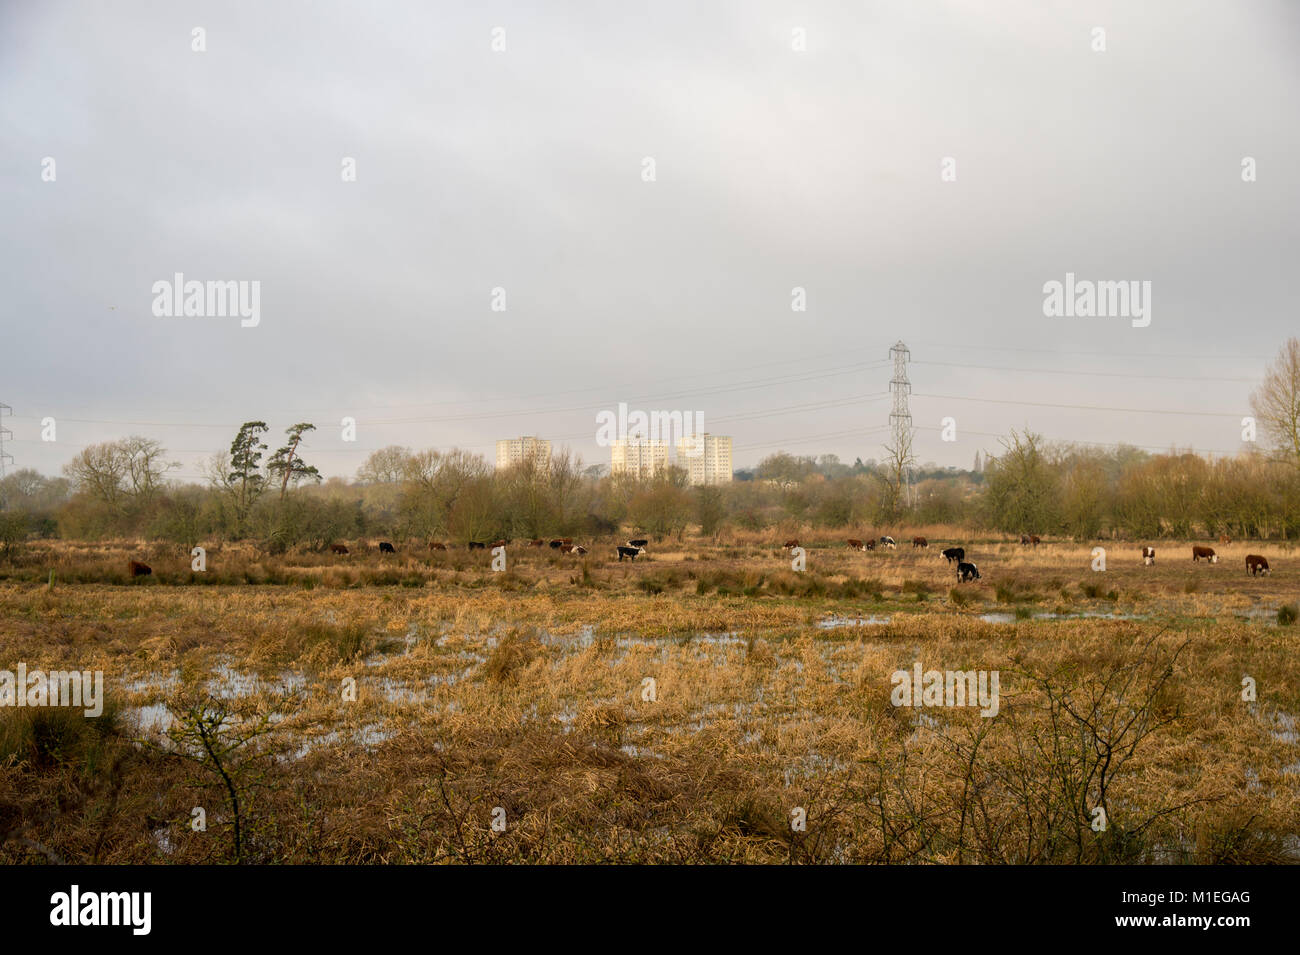 Flooded watermeadows, A33 Reading UK Stock Photo